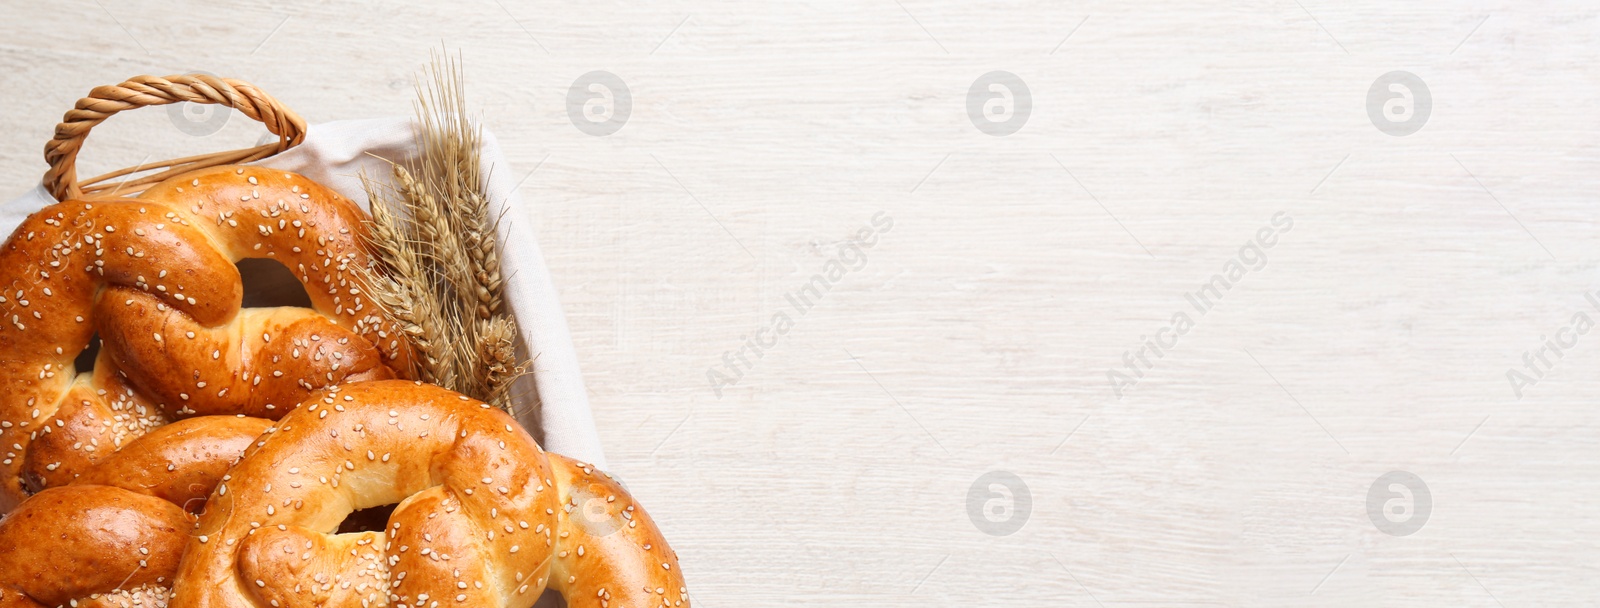 Image of Basket with delicious pretzels and wheat spikes on white wooden table, top view with space for text. Banner design